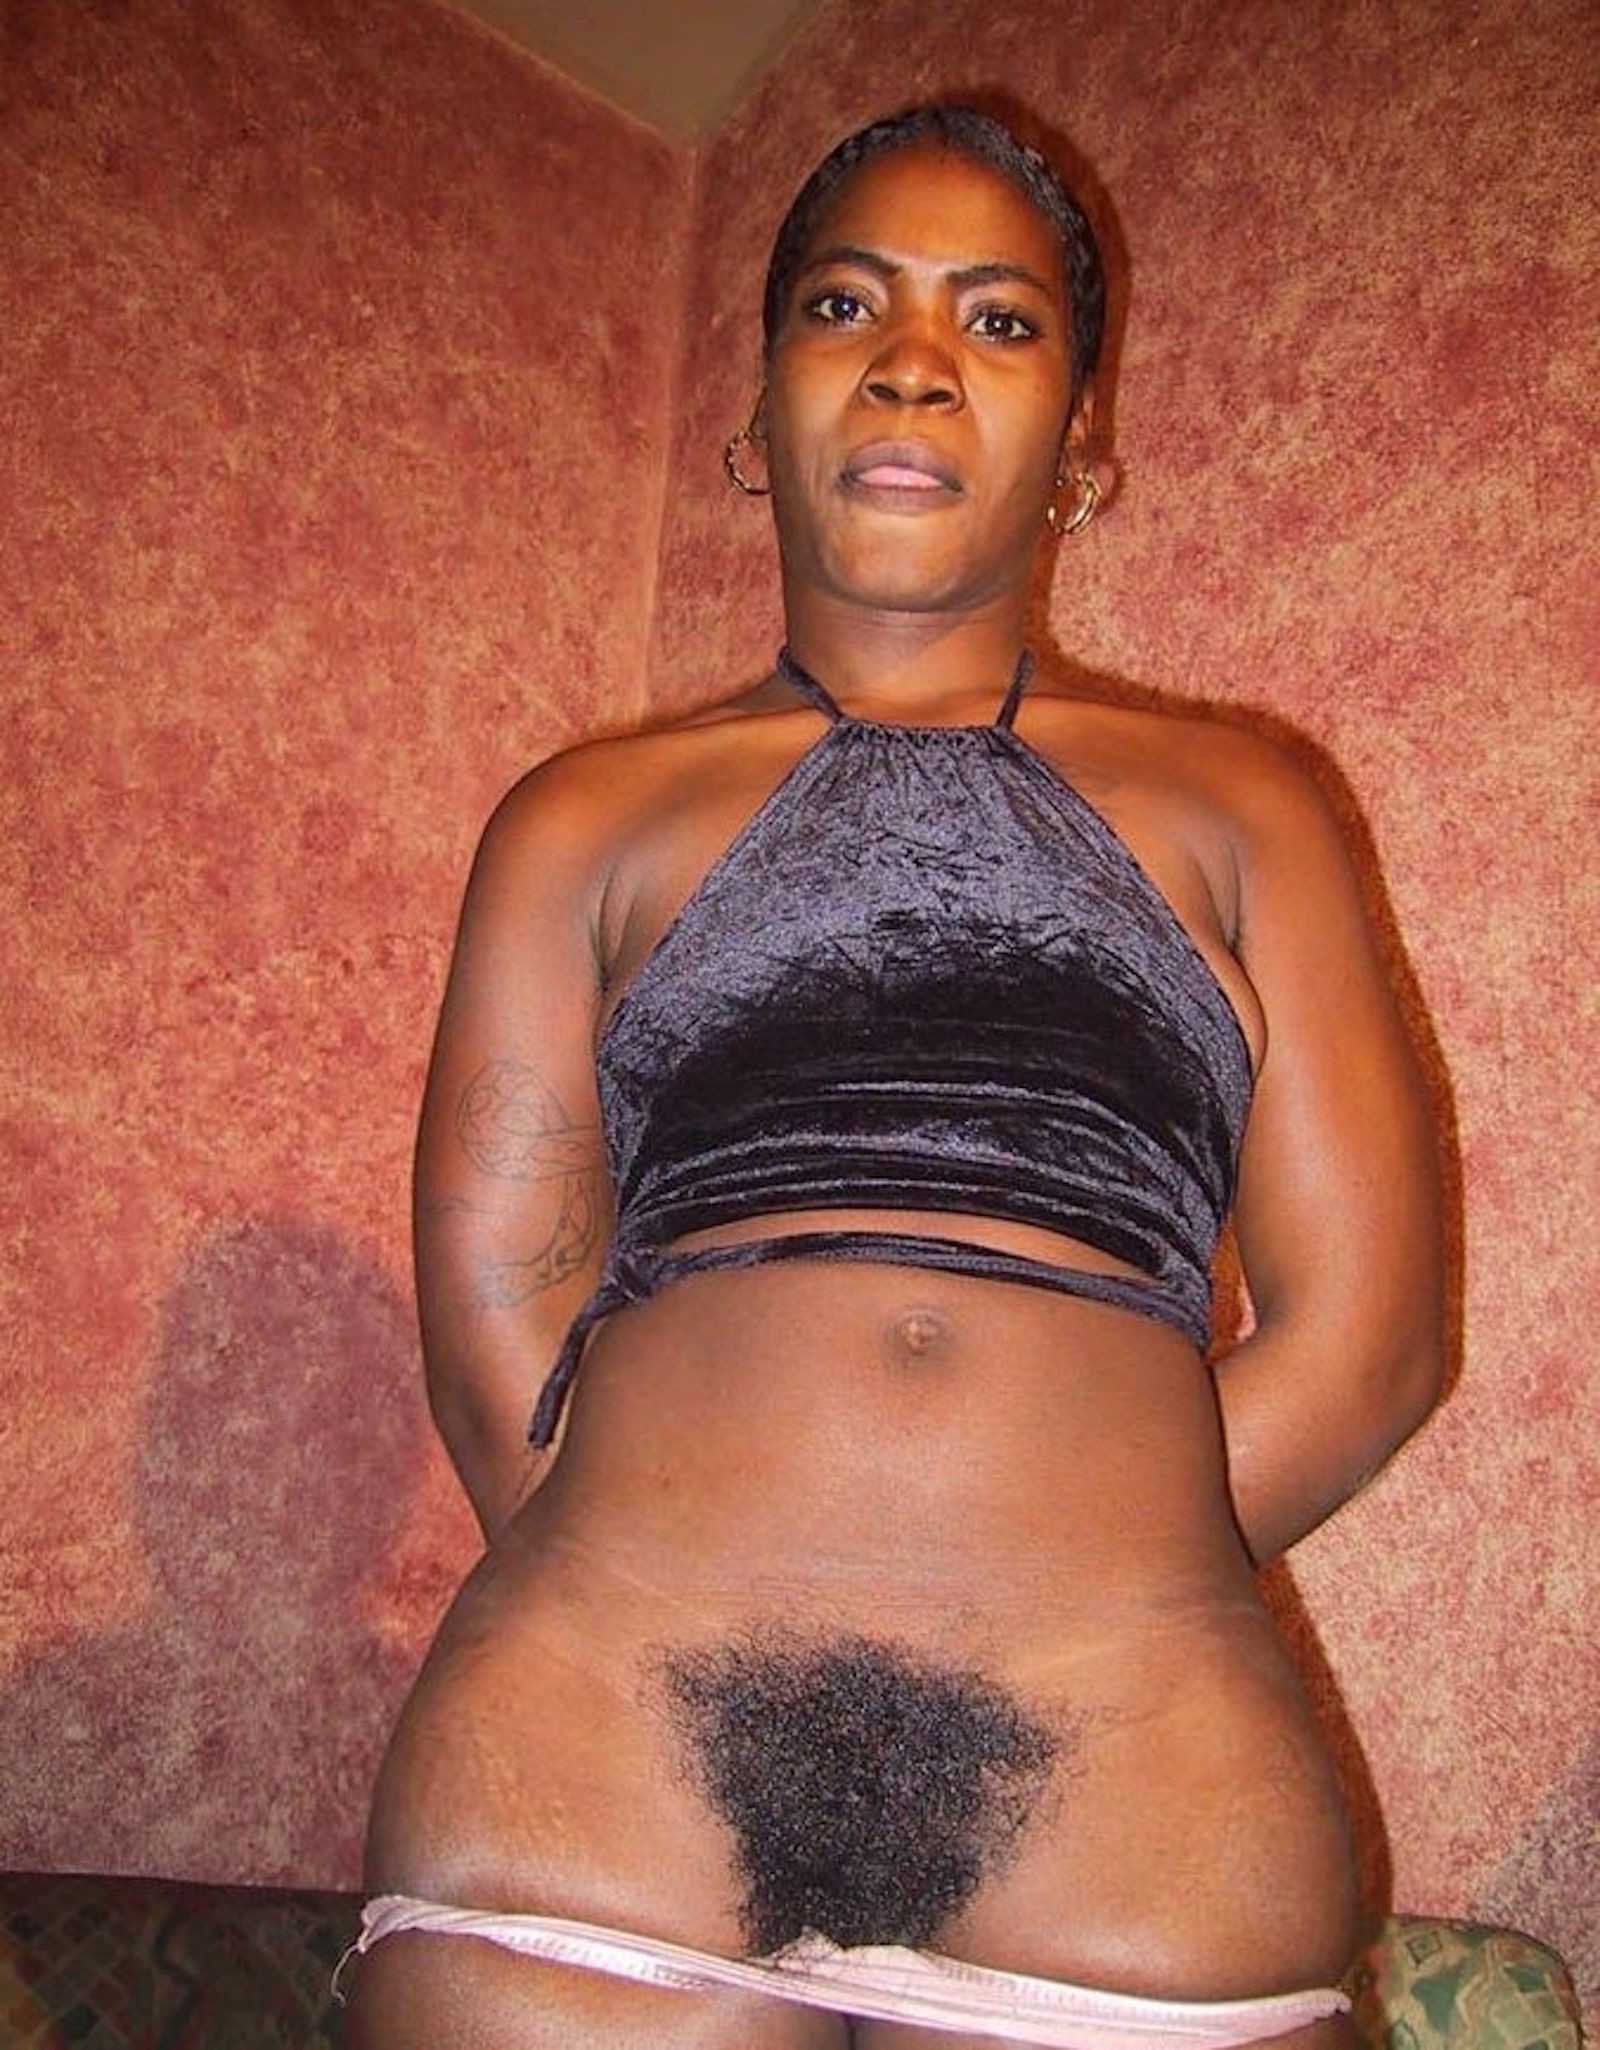 Haitian Woman With A Hairy Puss